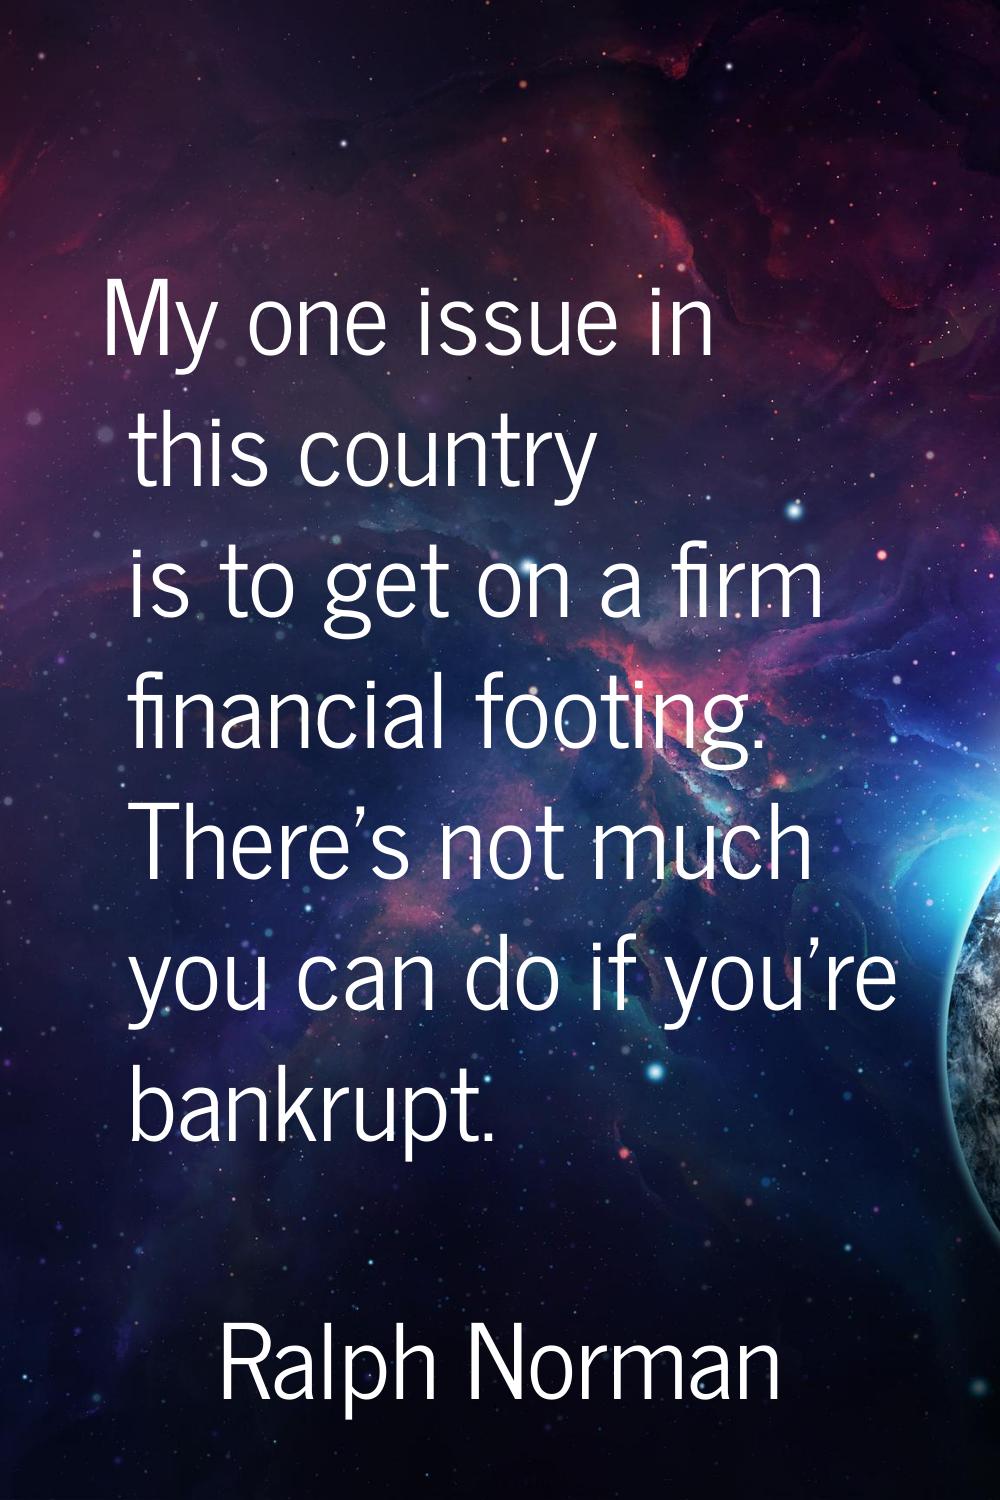 My one issue in this country is to get on a firm financial footing. There's not much you can do if 